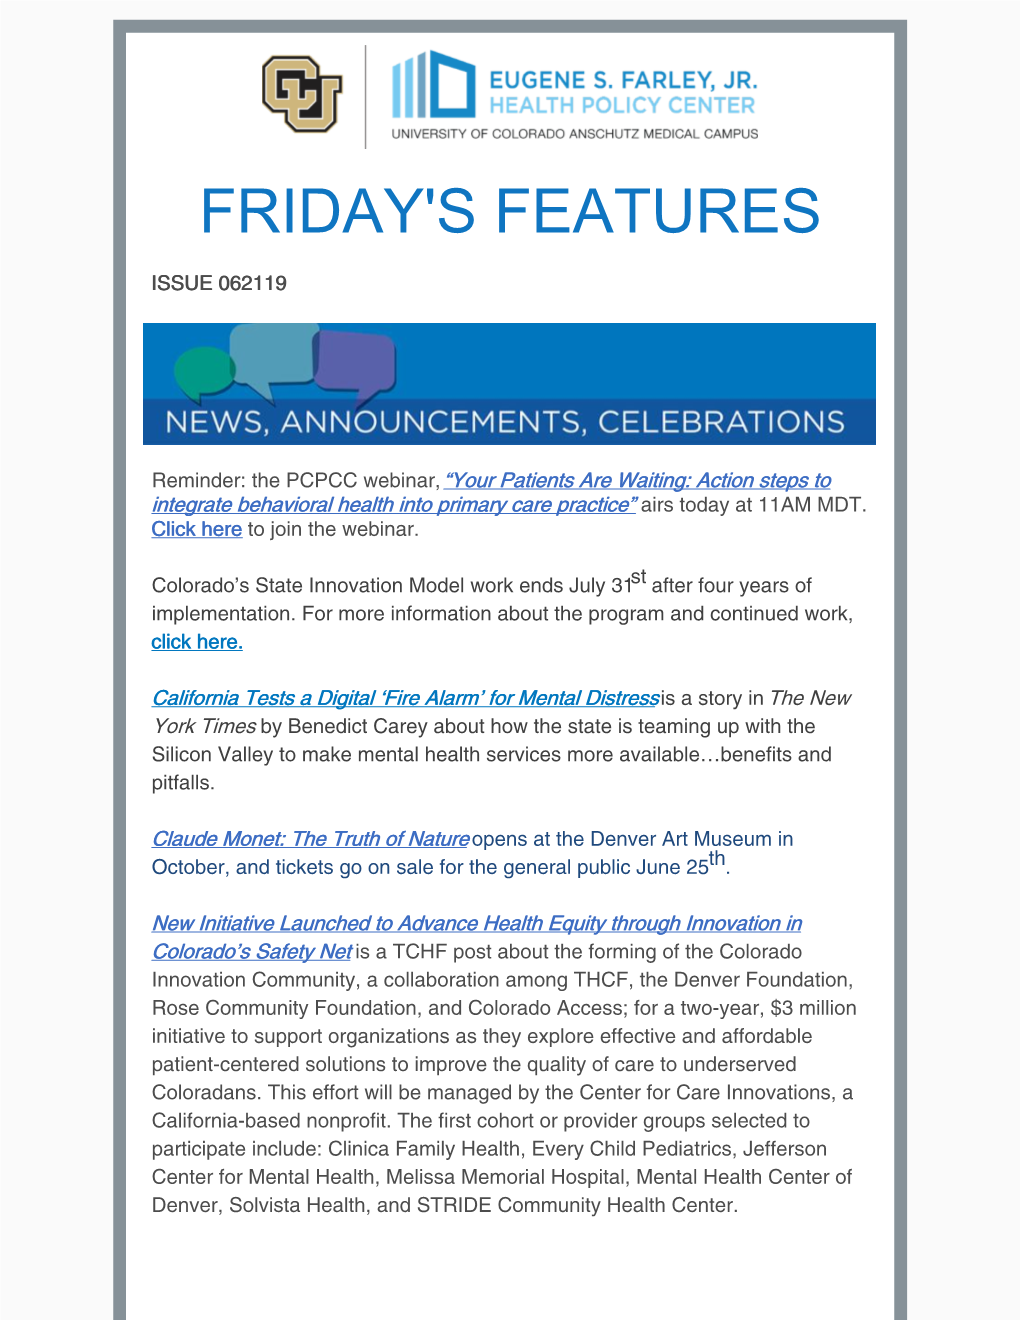 Friday's Features June 21, 2019